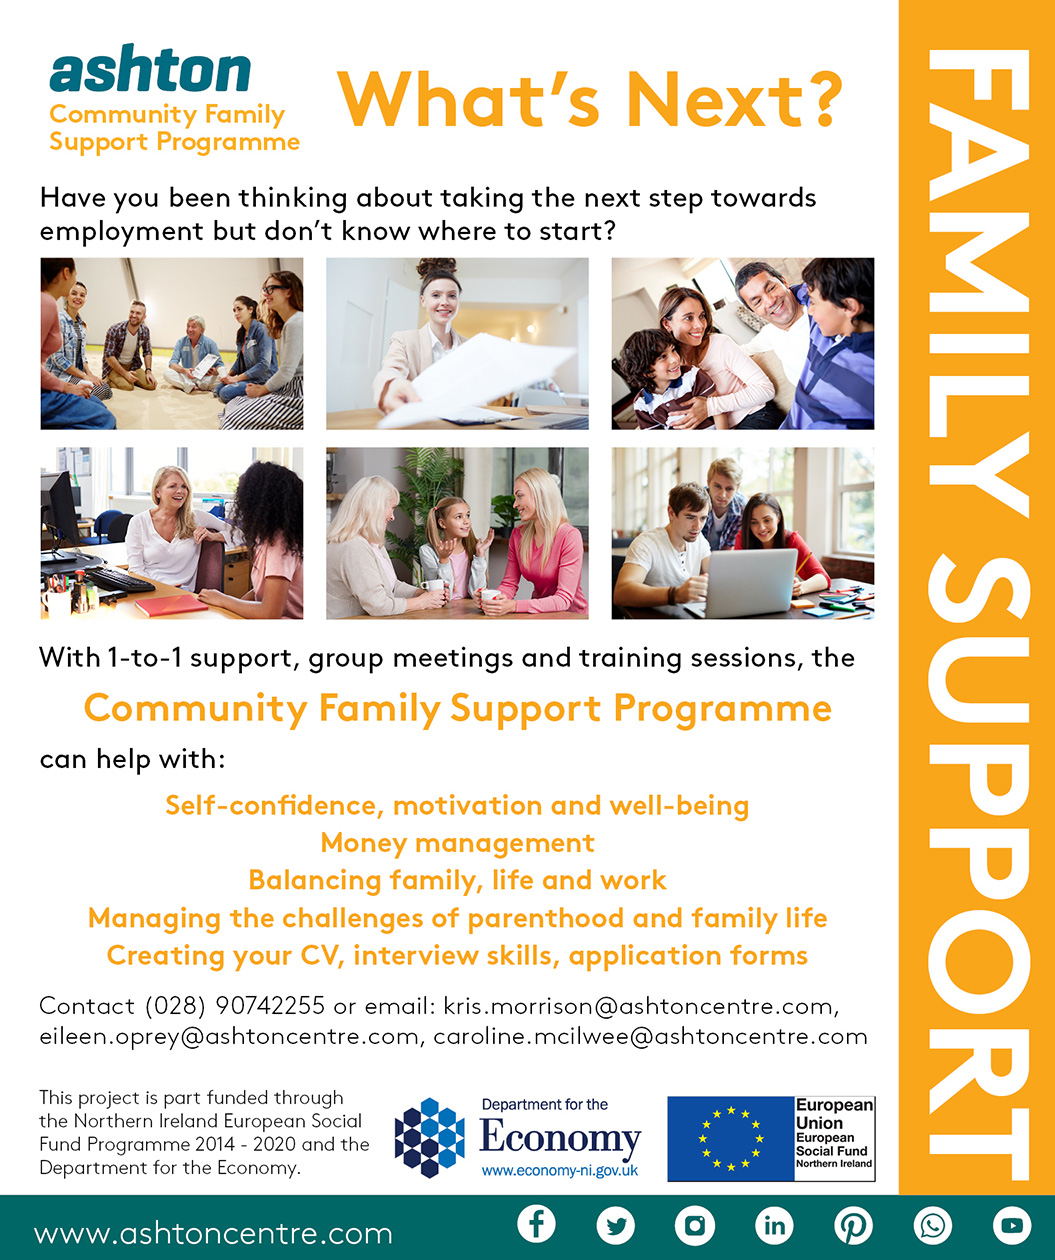 Community Family Support Programme - What's Next?